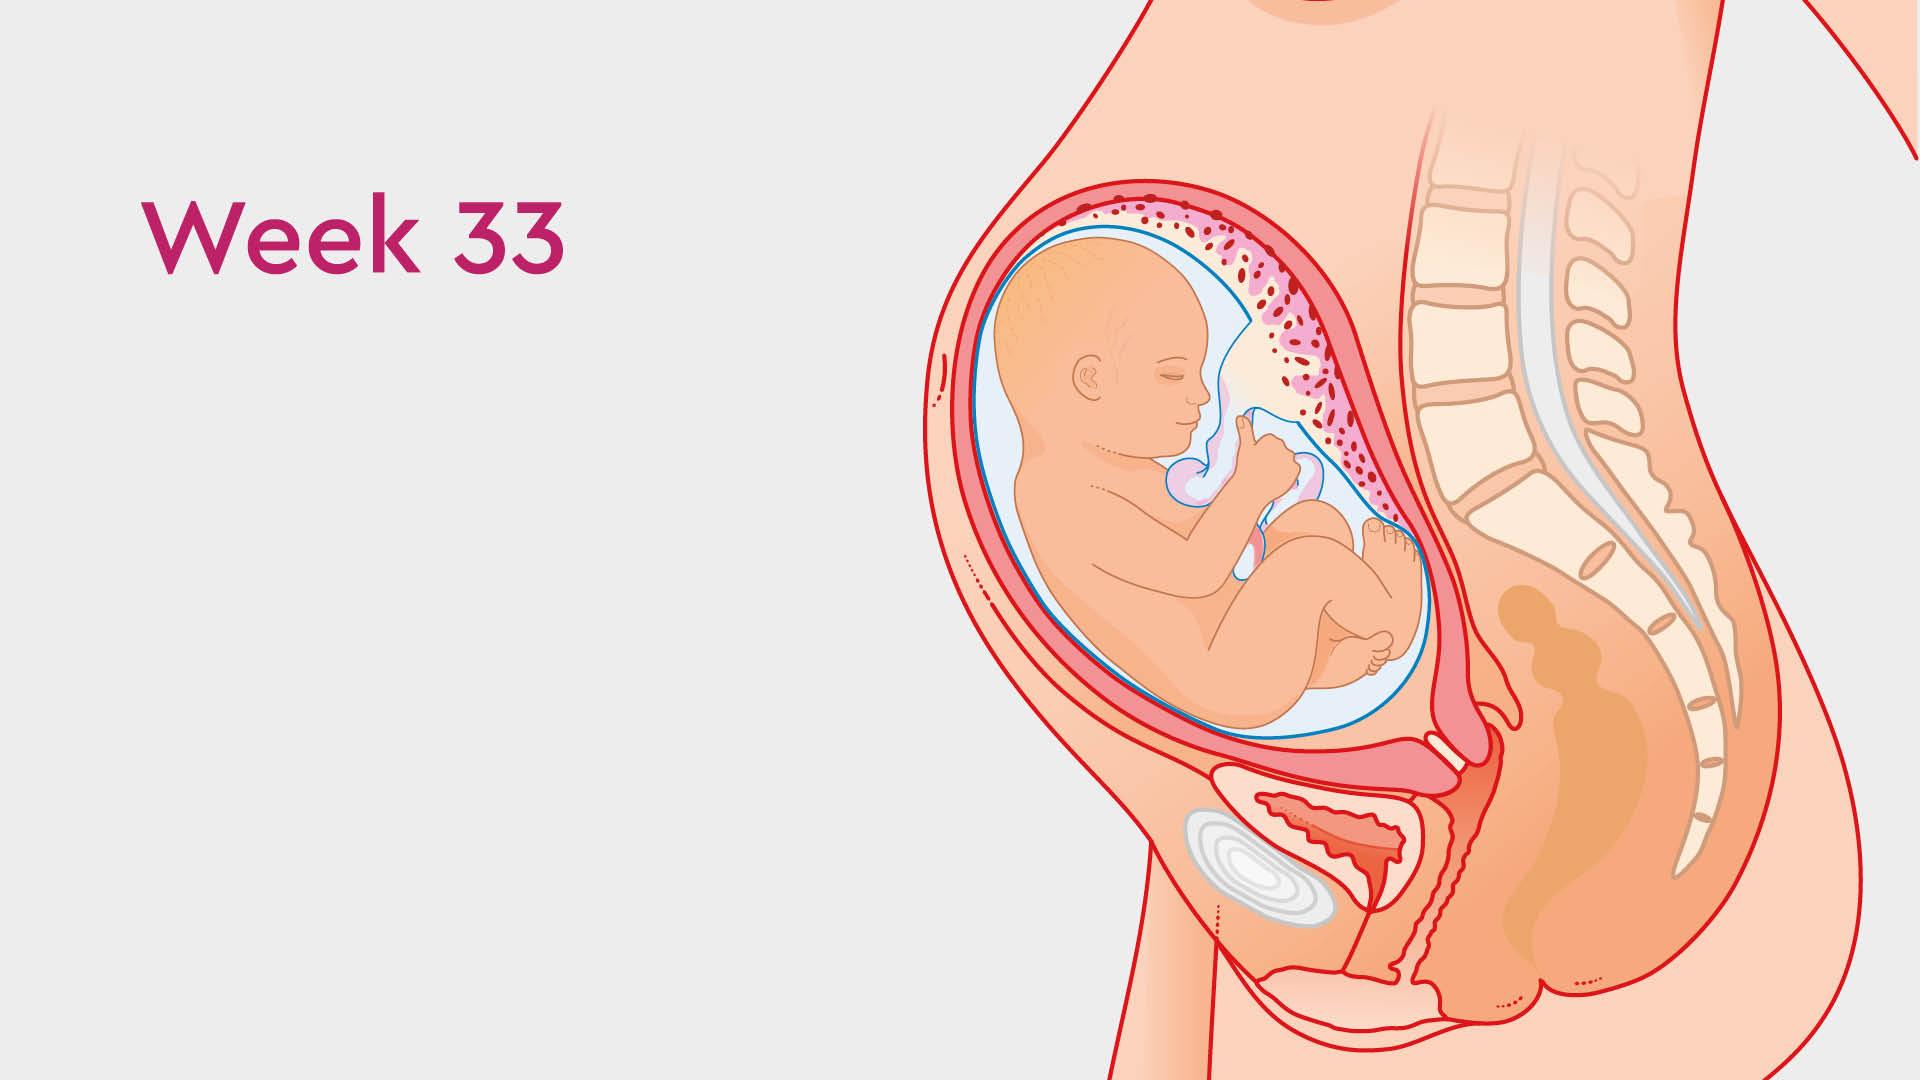 28 Weeks Pregnant: Symptoms, Size, and Development